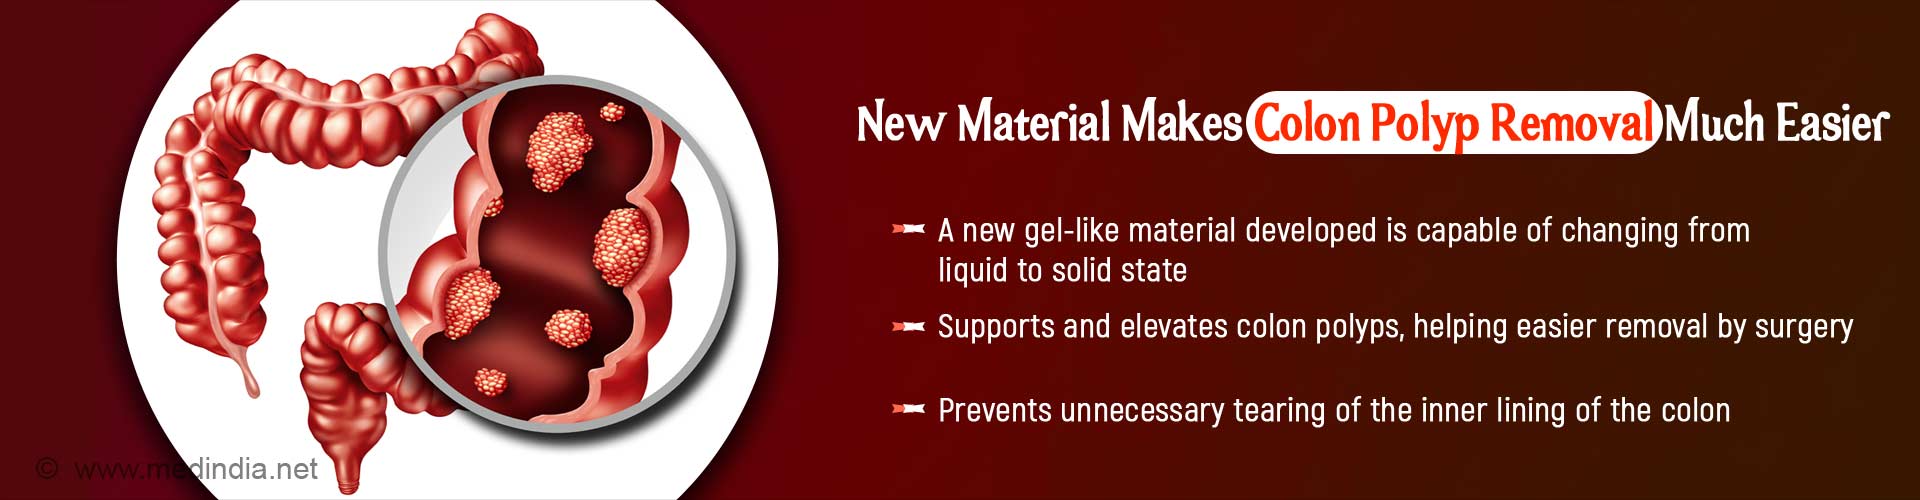 New material makes colon polyps removal much easier. A new gel-like material developed is capable of changing from liquid to solid state. Supports and elevates colon polyps, helping easier removal by surgery. Prevents unnecessary tearing of the inner lining of the colon.